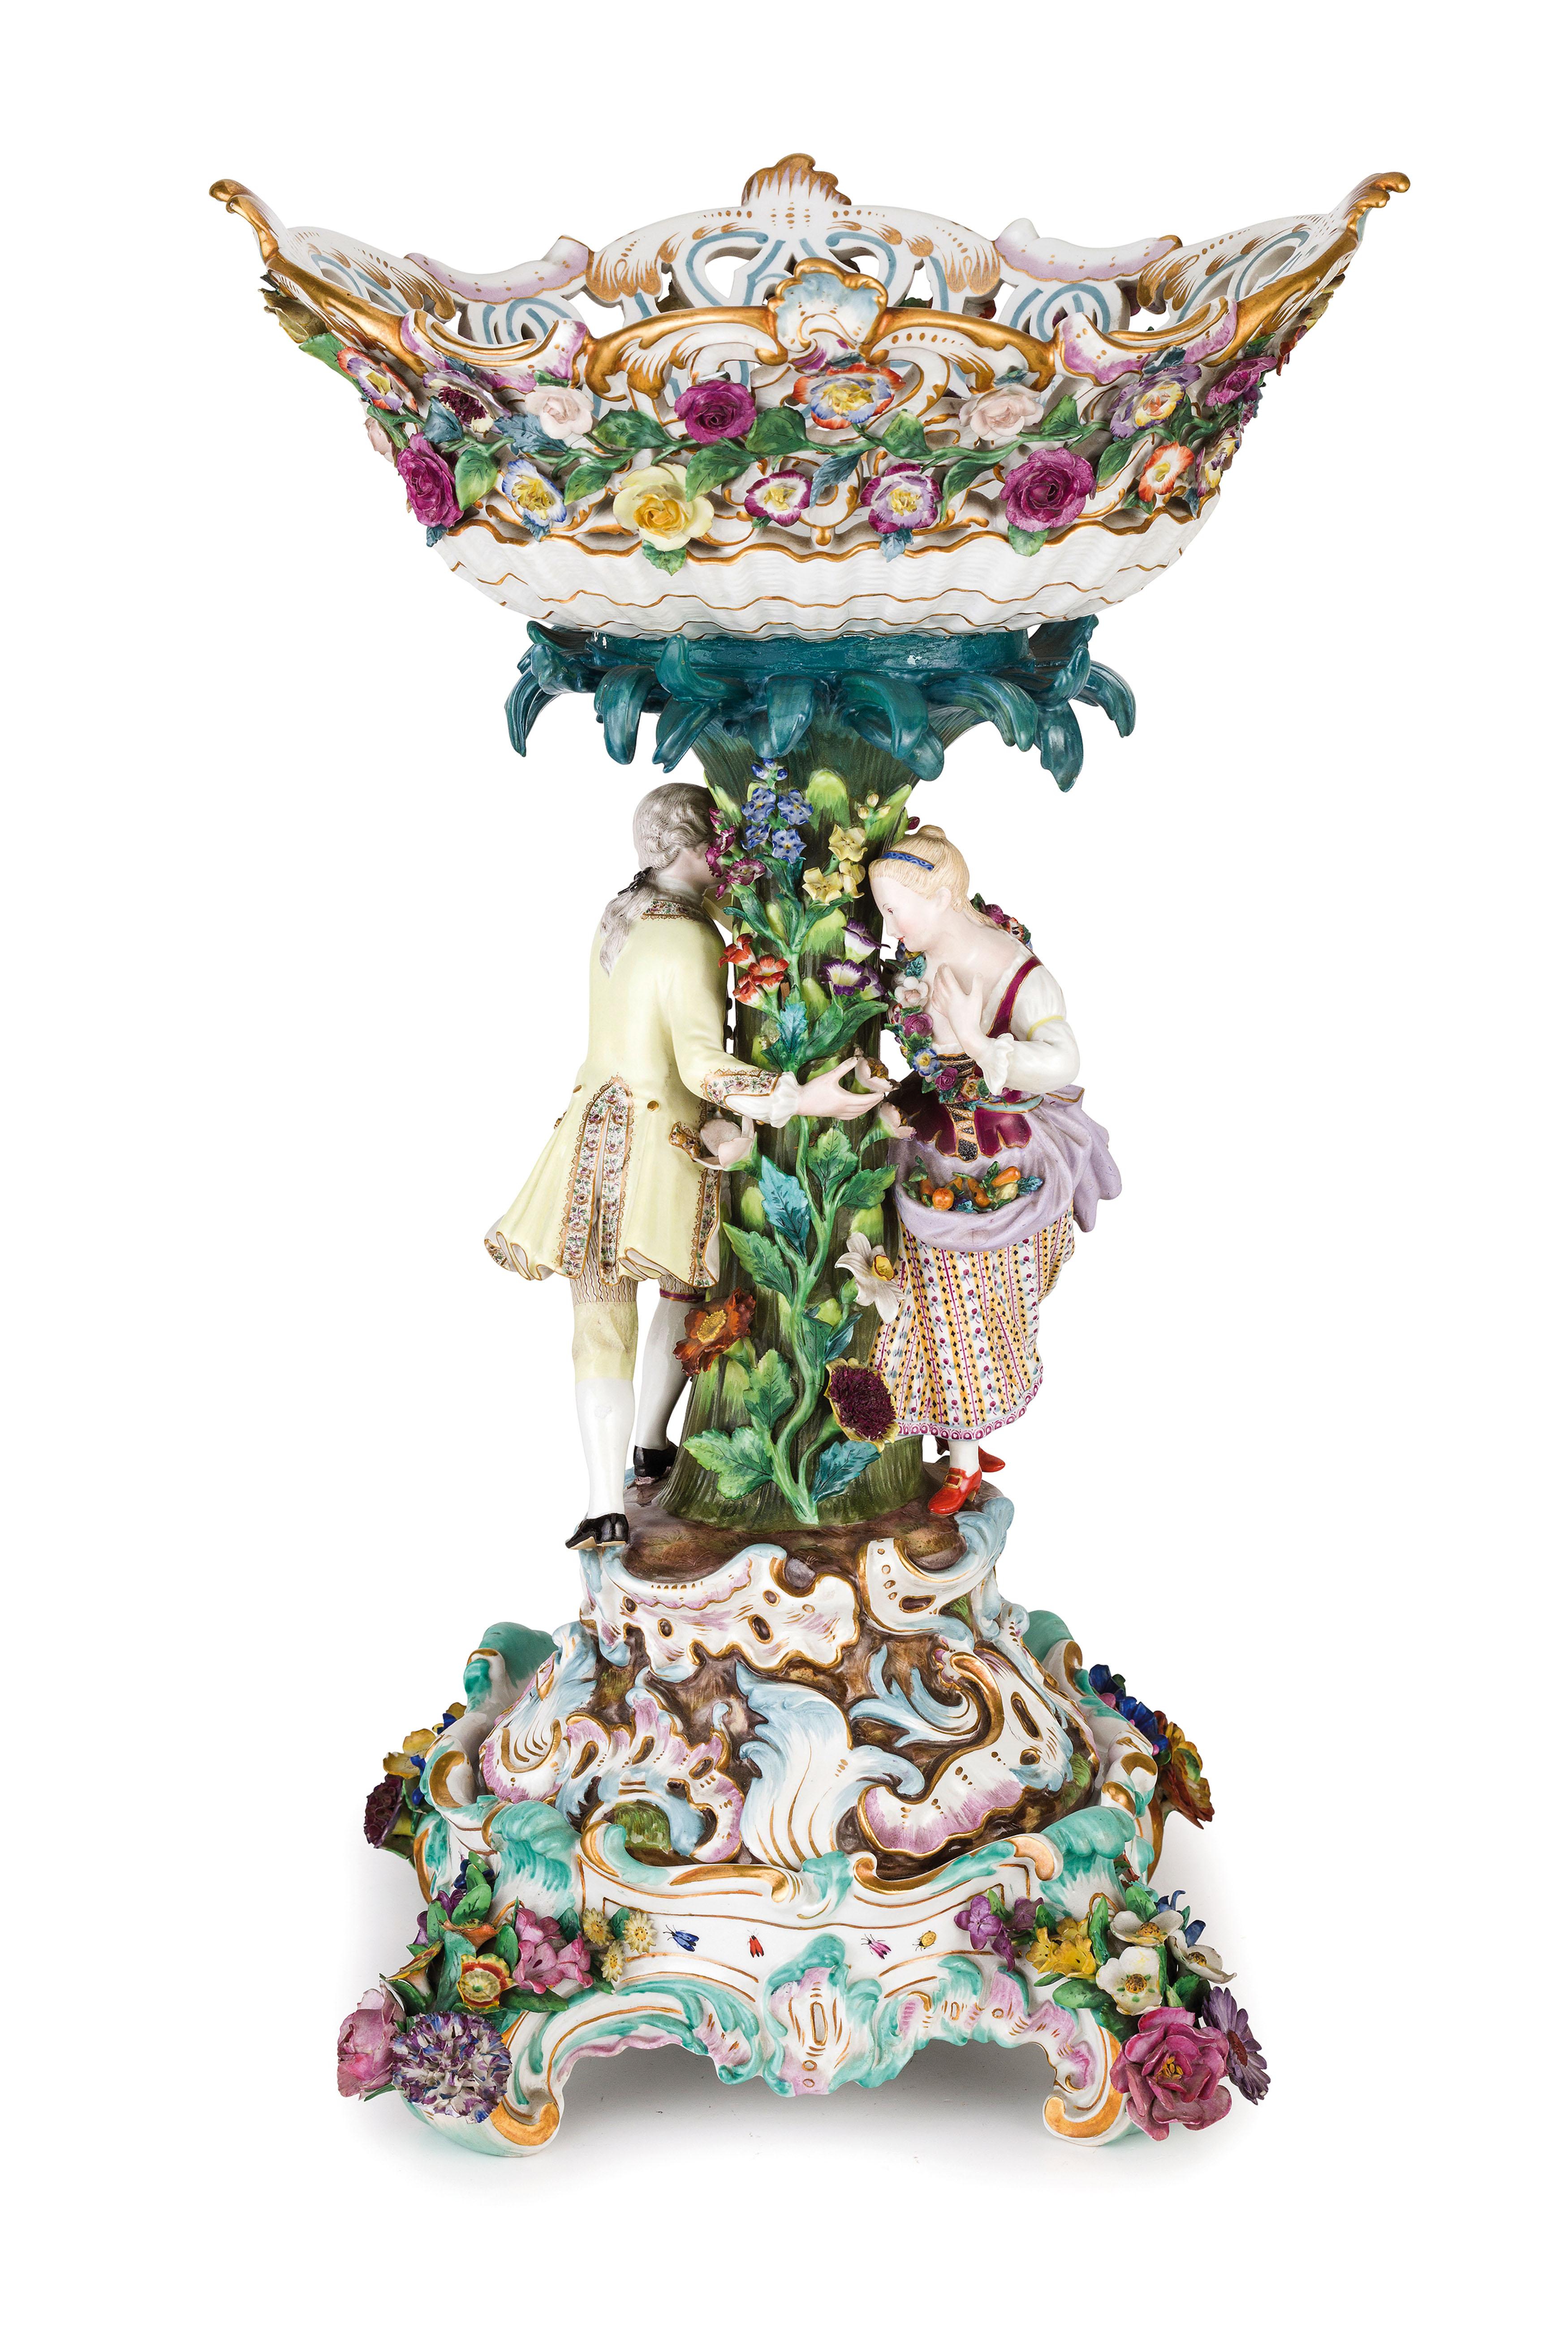 19th century pair of Meissen Porcelain centerpieces.
Signed Meissen manufactory.

The pair of centerpiece was made in Germany in the 19th century in finely painted Meissen Porcelain.
The centerpieces are composed of a raised one with rich floral